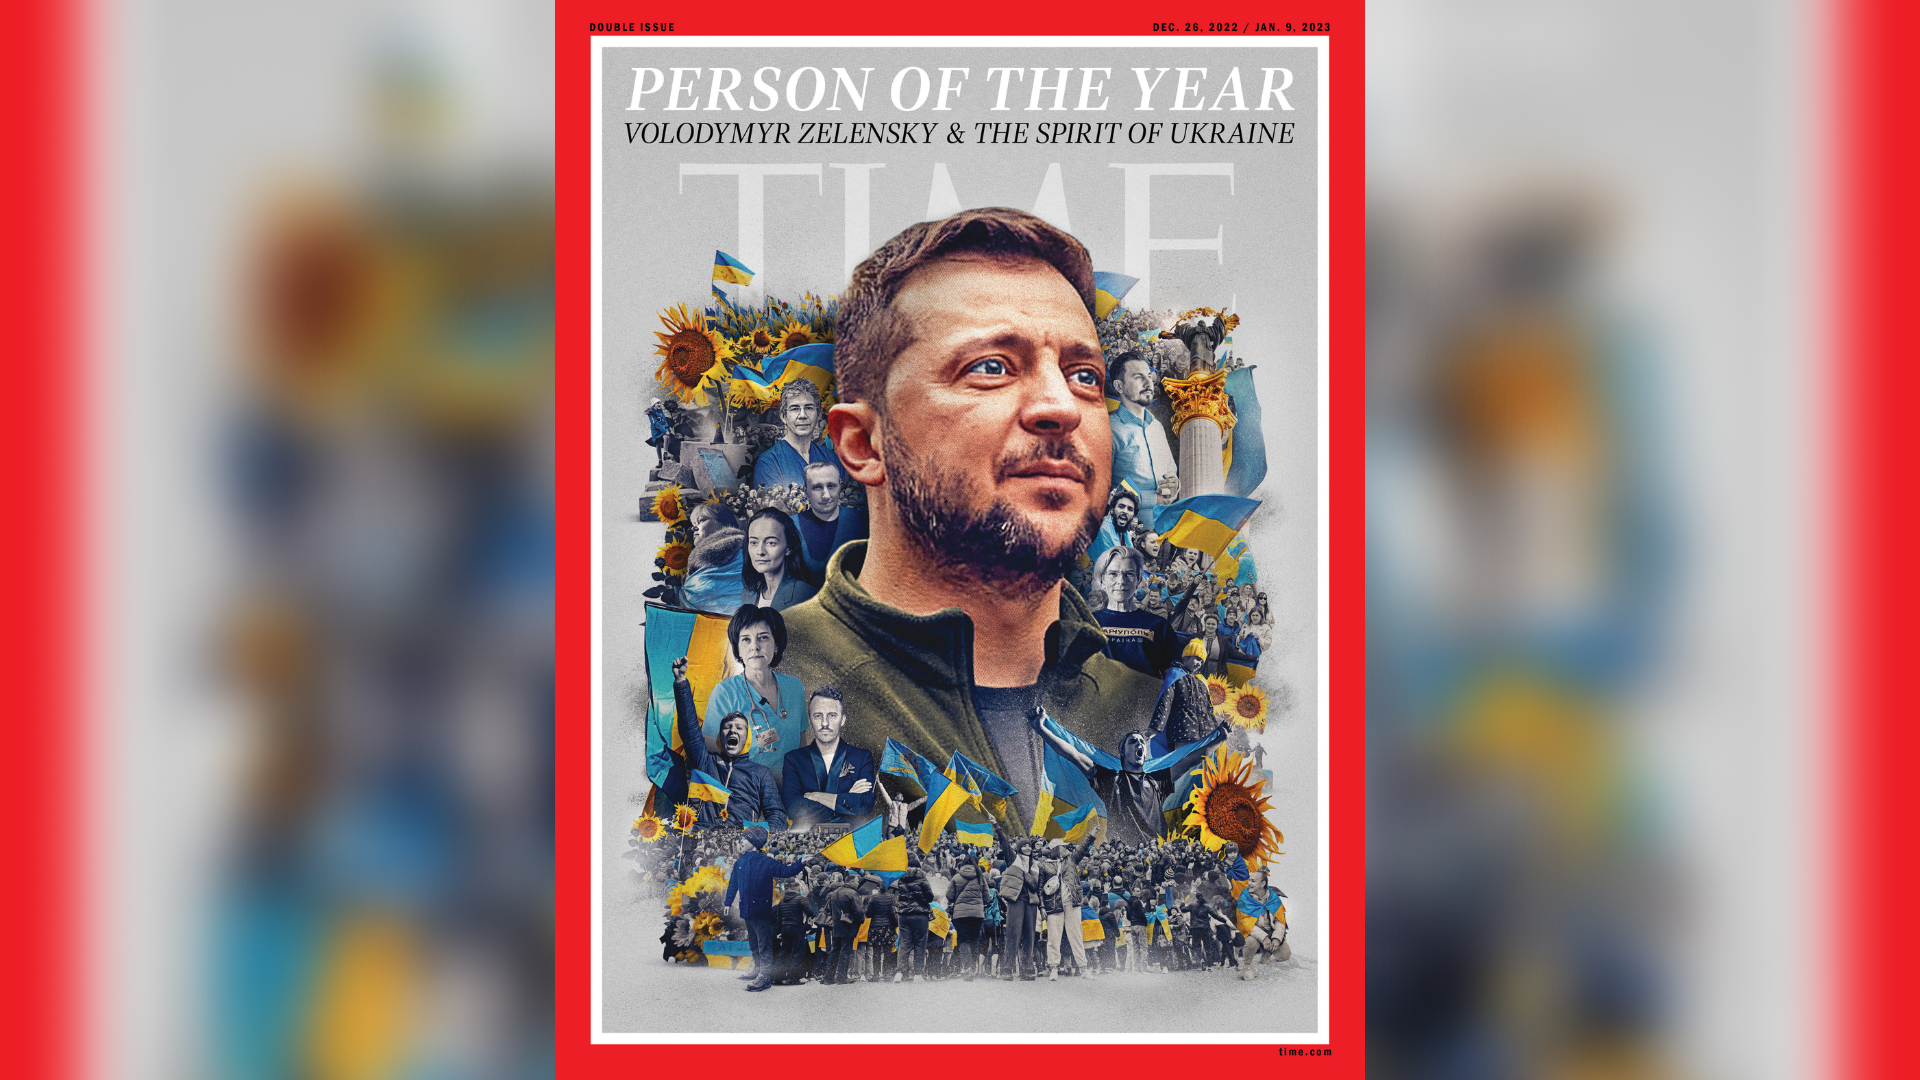 Volodymyr Zelensky is pictured on the cover of TIME as the person of the year...